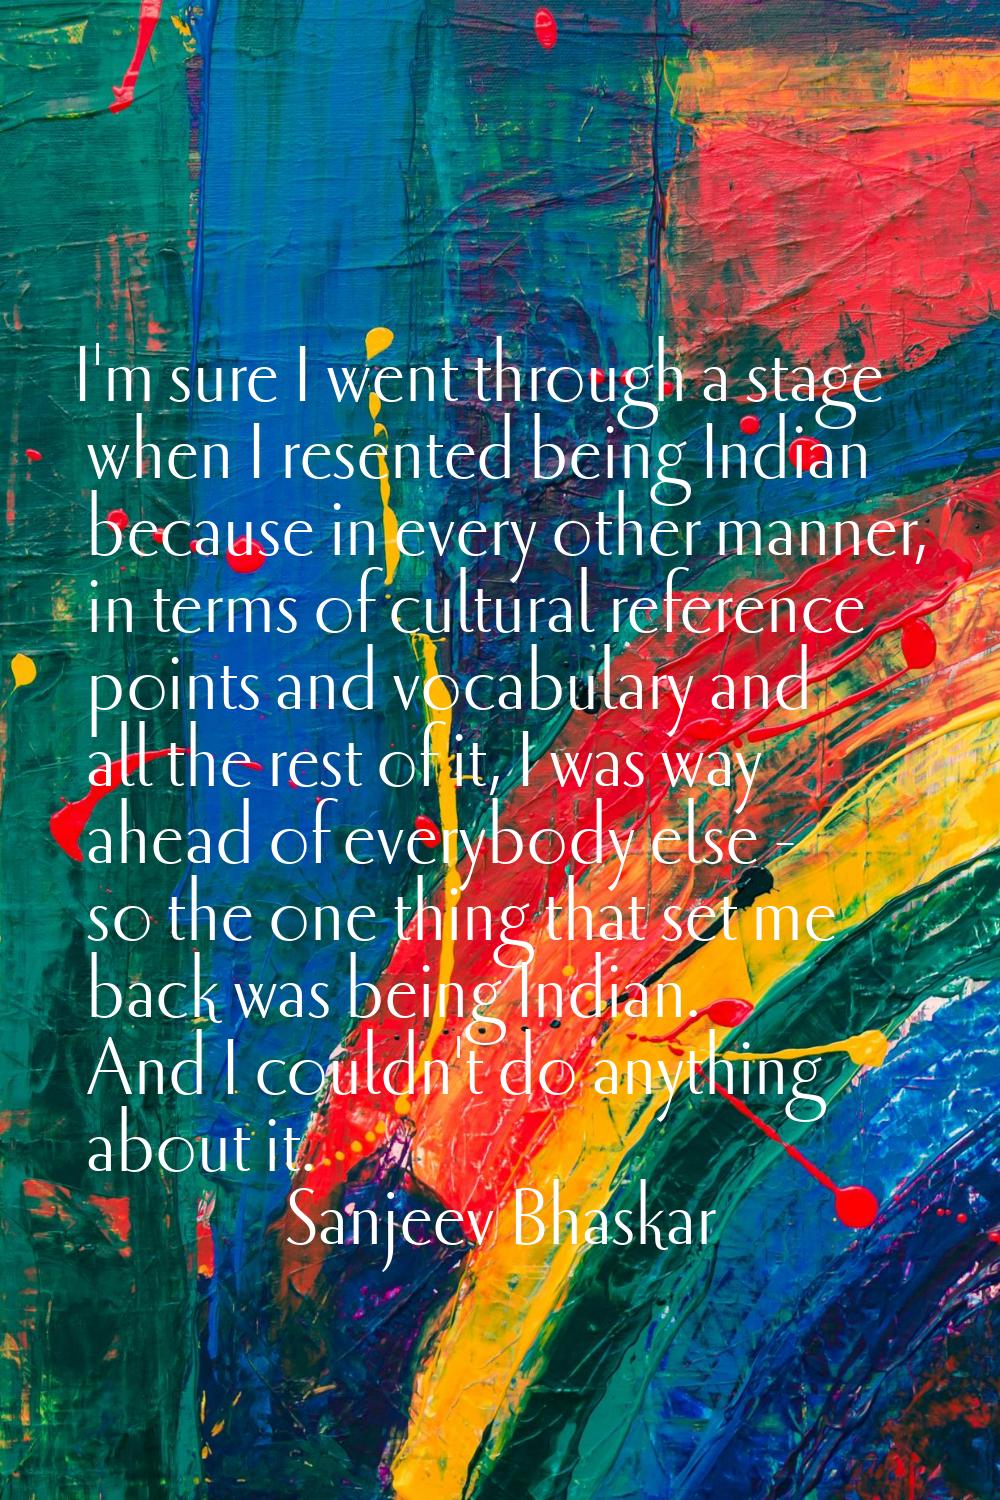 I'm sure I went through a stage when I resented being Indian because in every other manner, in term